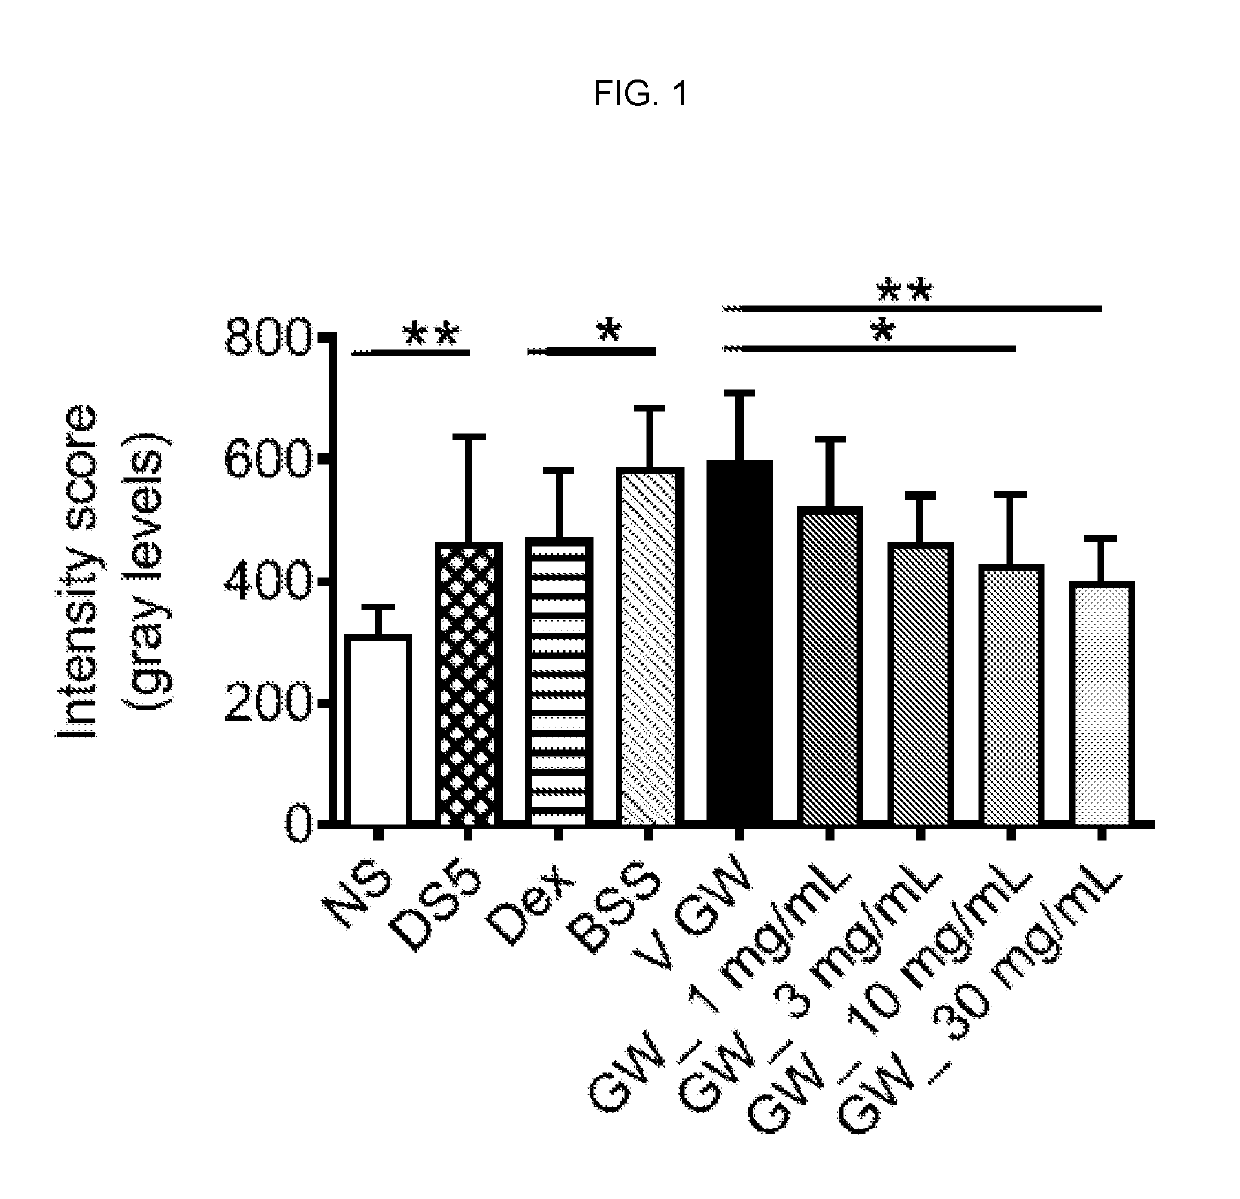 Pharmaceutical compositions comprising an integrin ALPHA4 antagonist for use in treating ocular inflammatory conditions